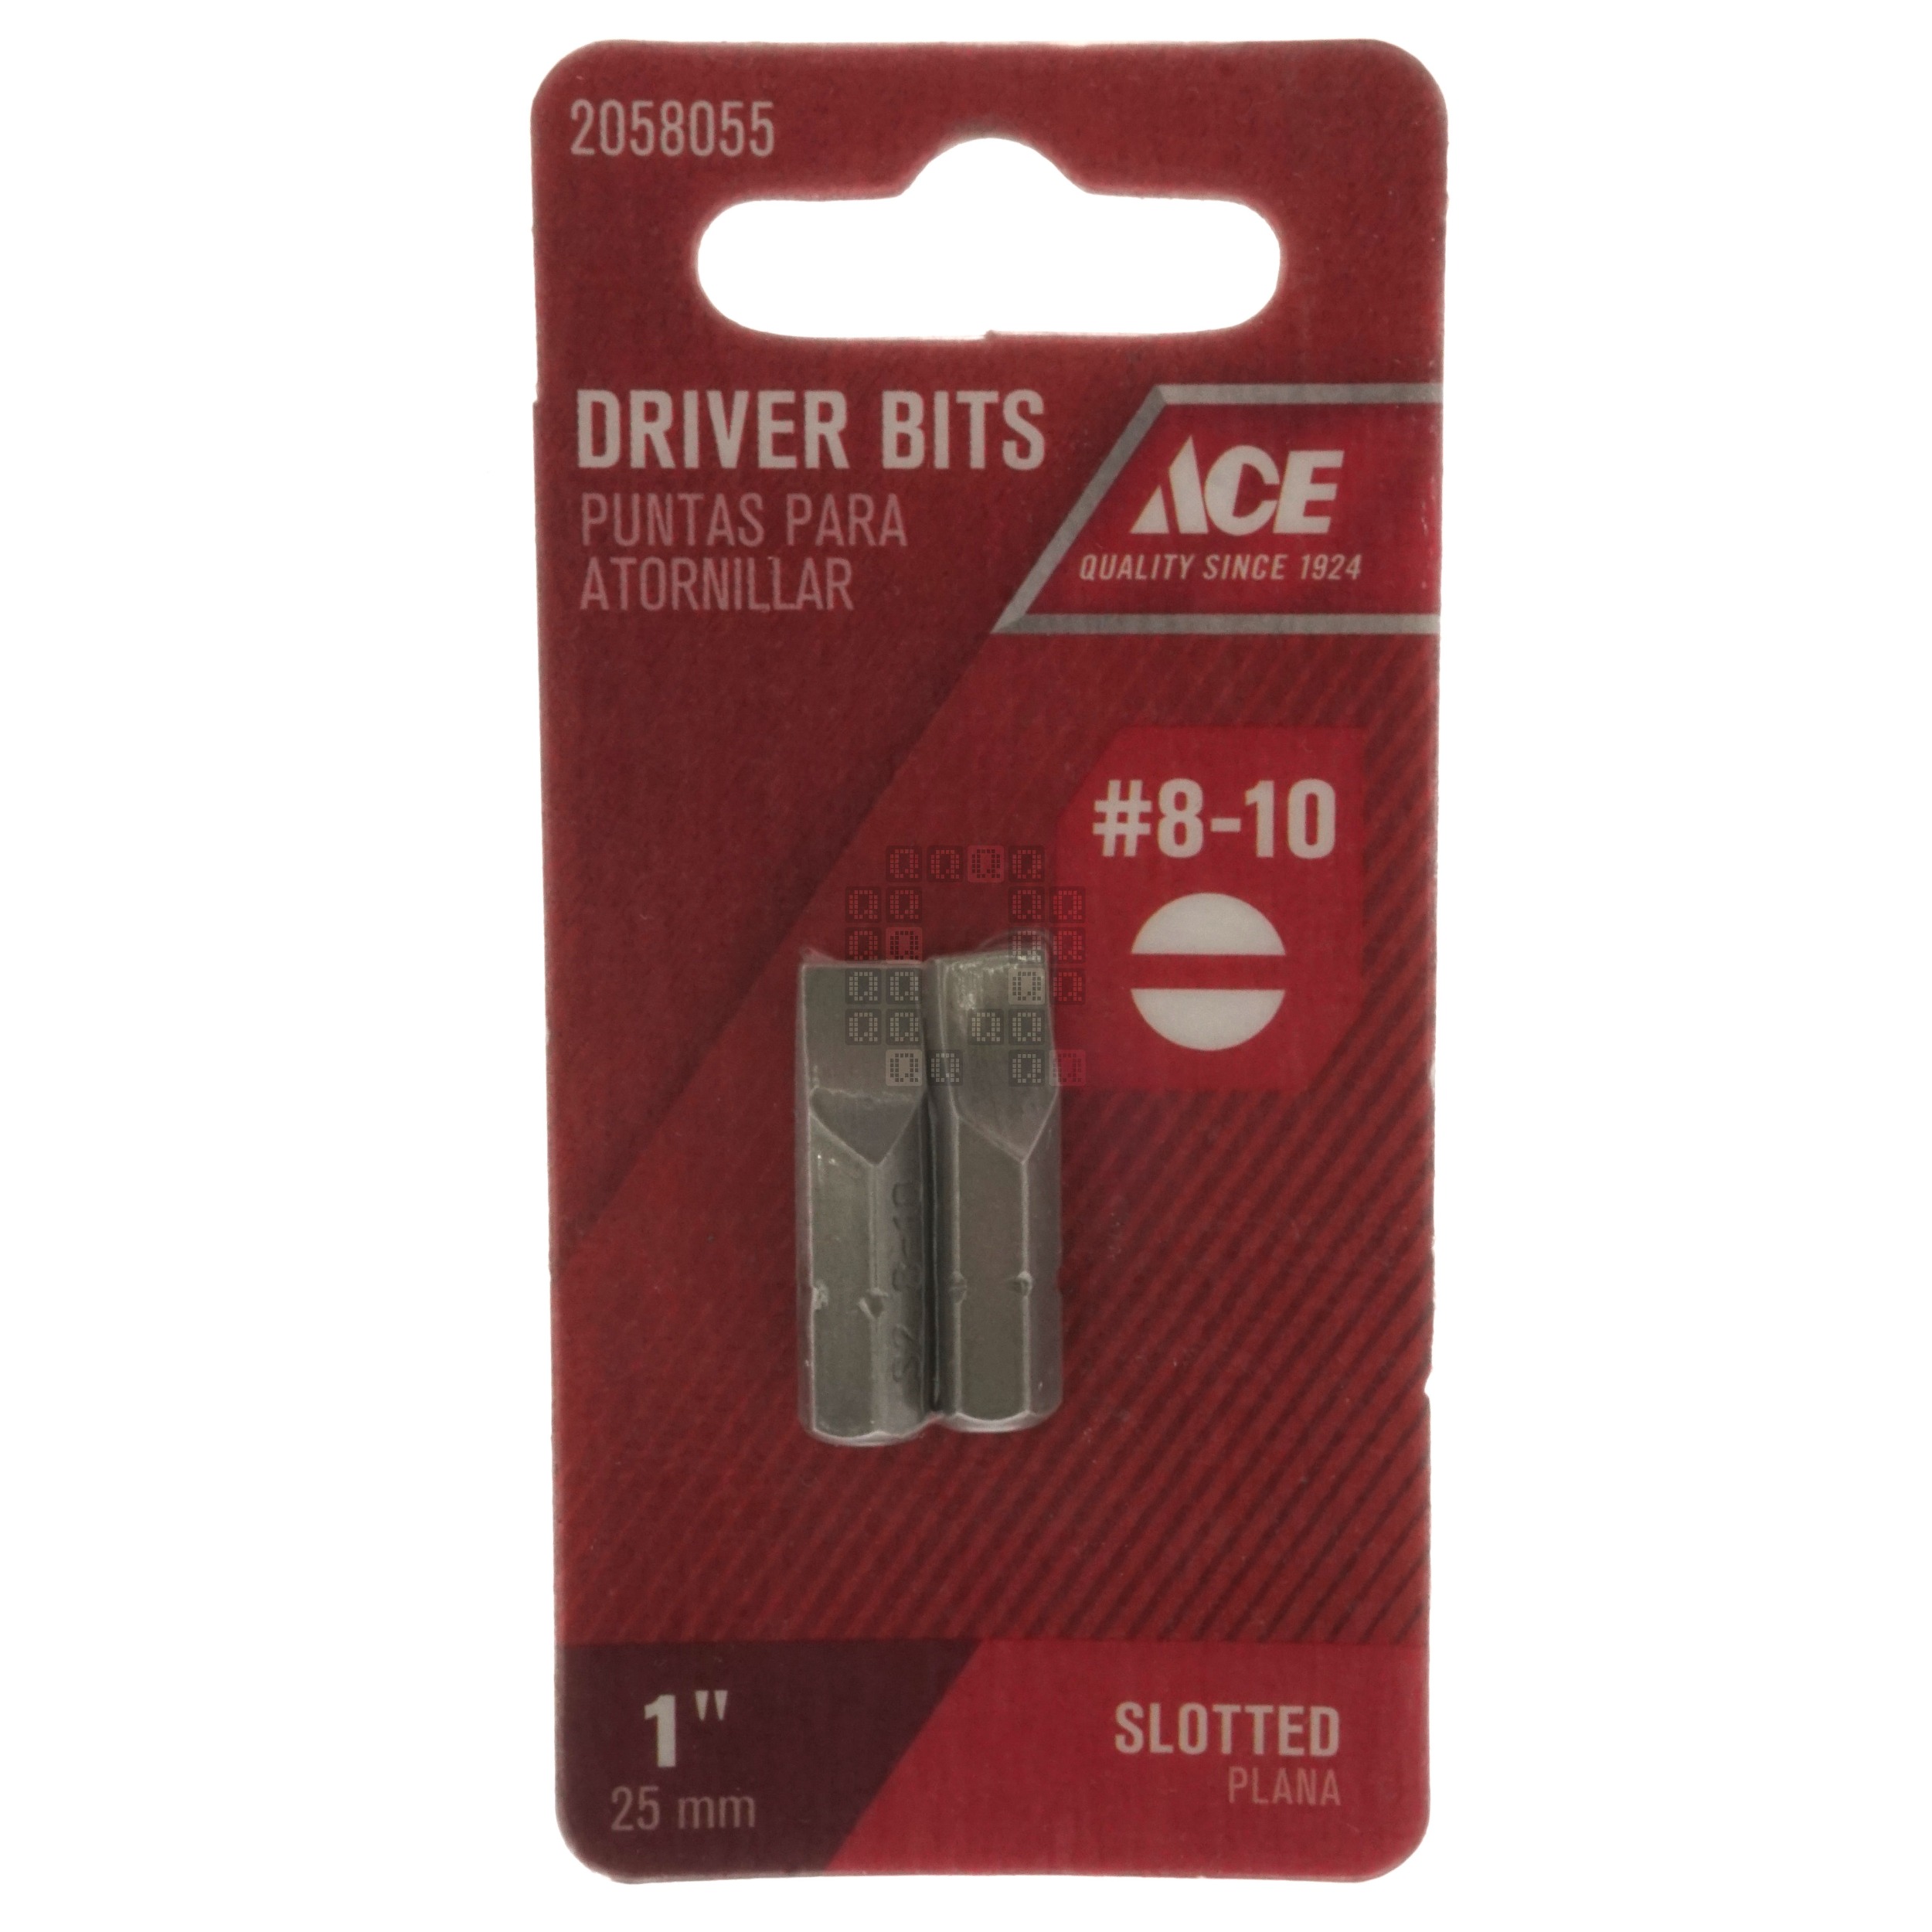 ACE Hardware 2058055 #8-10 Slotted Driver Bits, 1" Length, 1/4" Hex Drive, 2-Pack